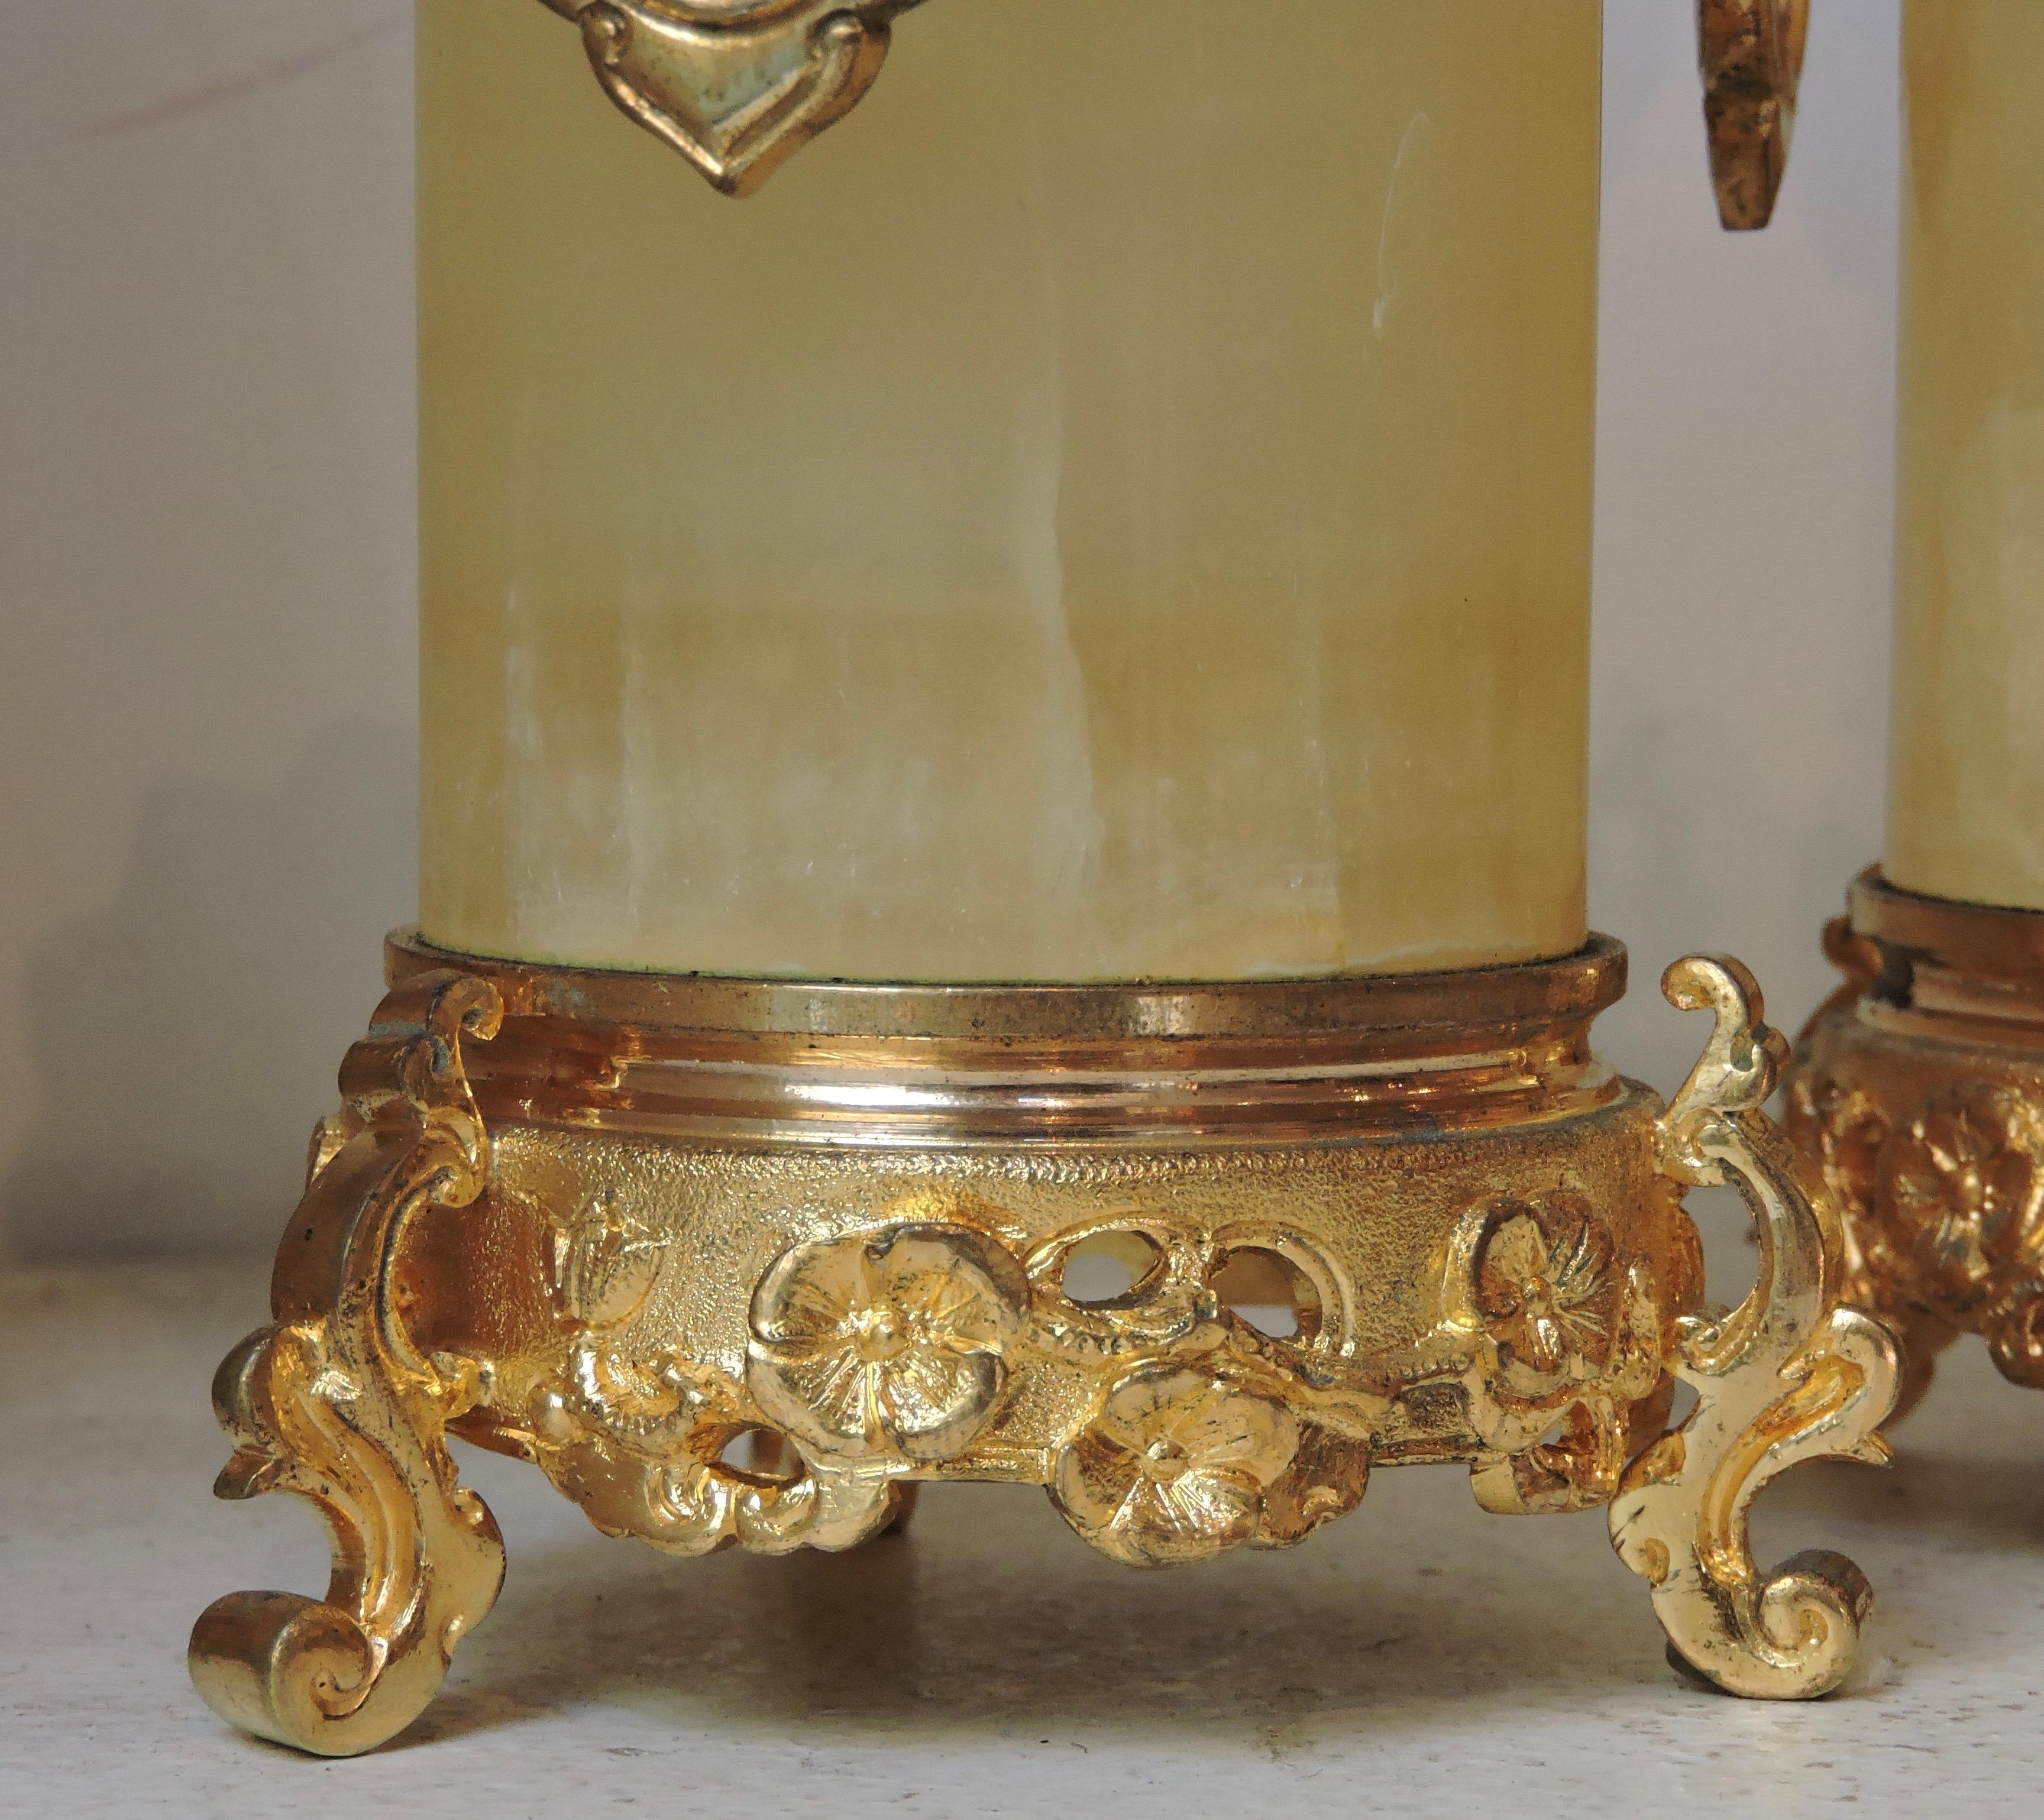 Set of 4 Japonisme Marble, Onyx and Ormolu Vases in the Style of Edouard Lièvre 1